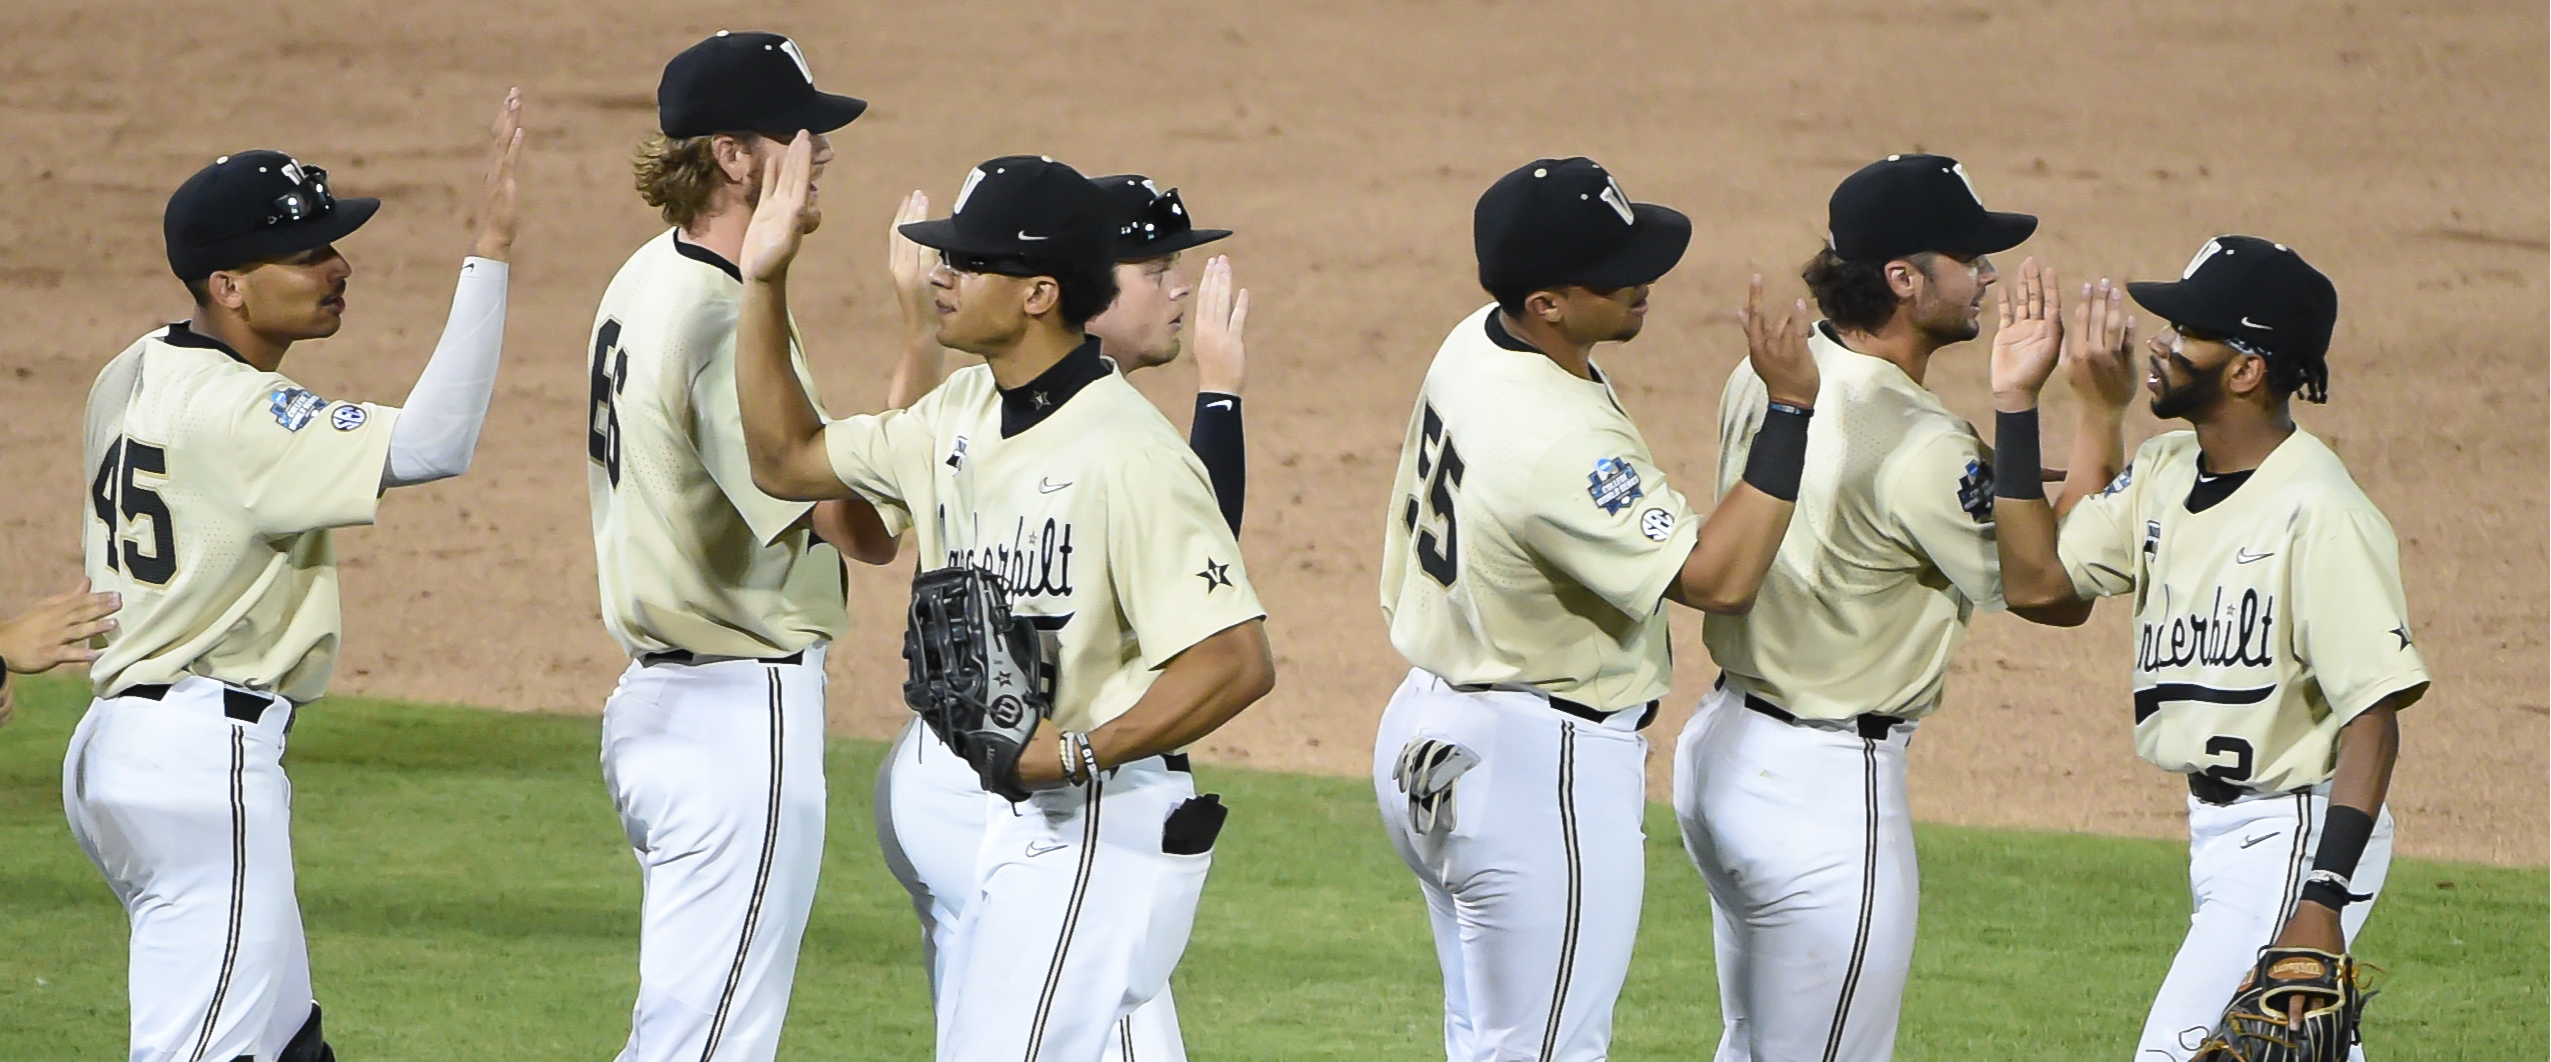 CWS: Vanderbilt takes Game 1 thanks to a huge first inning